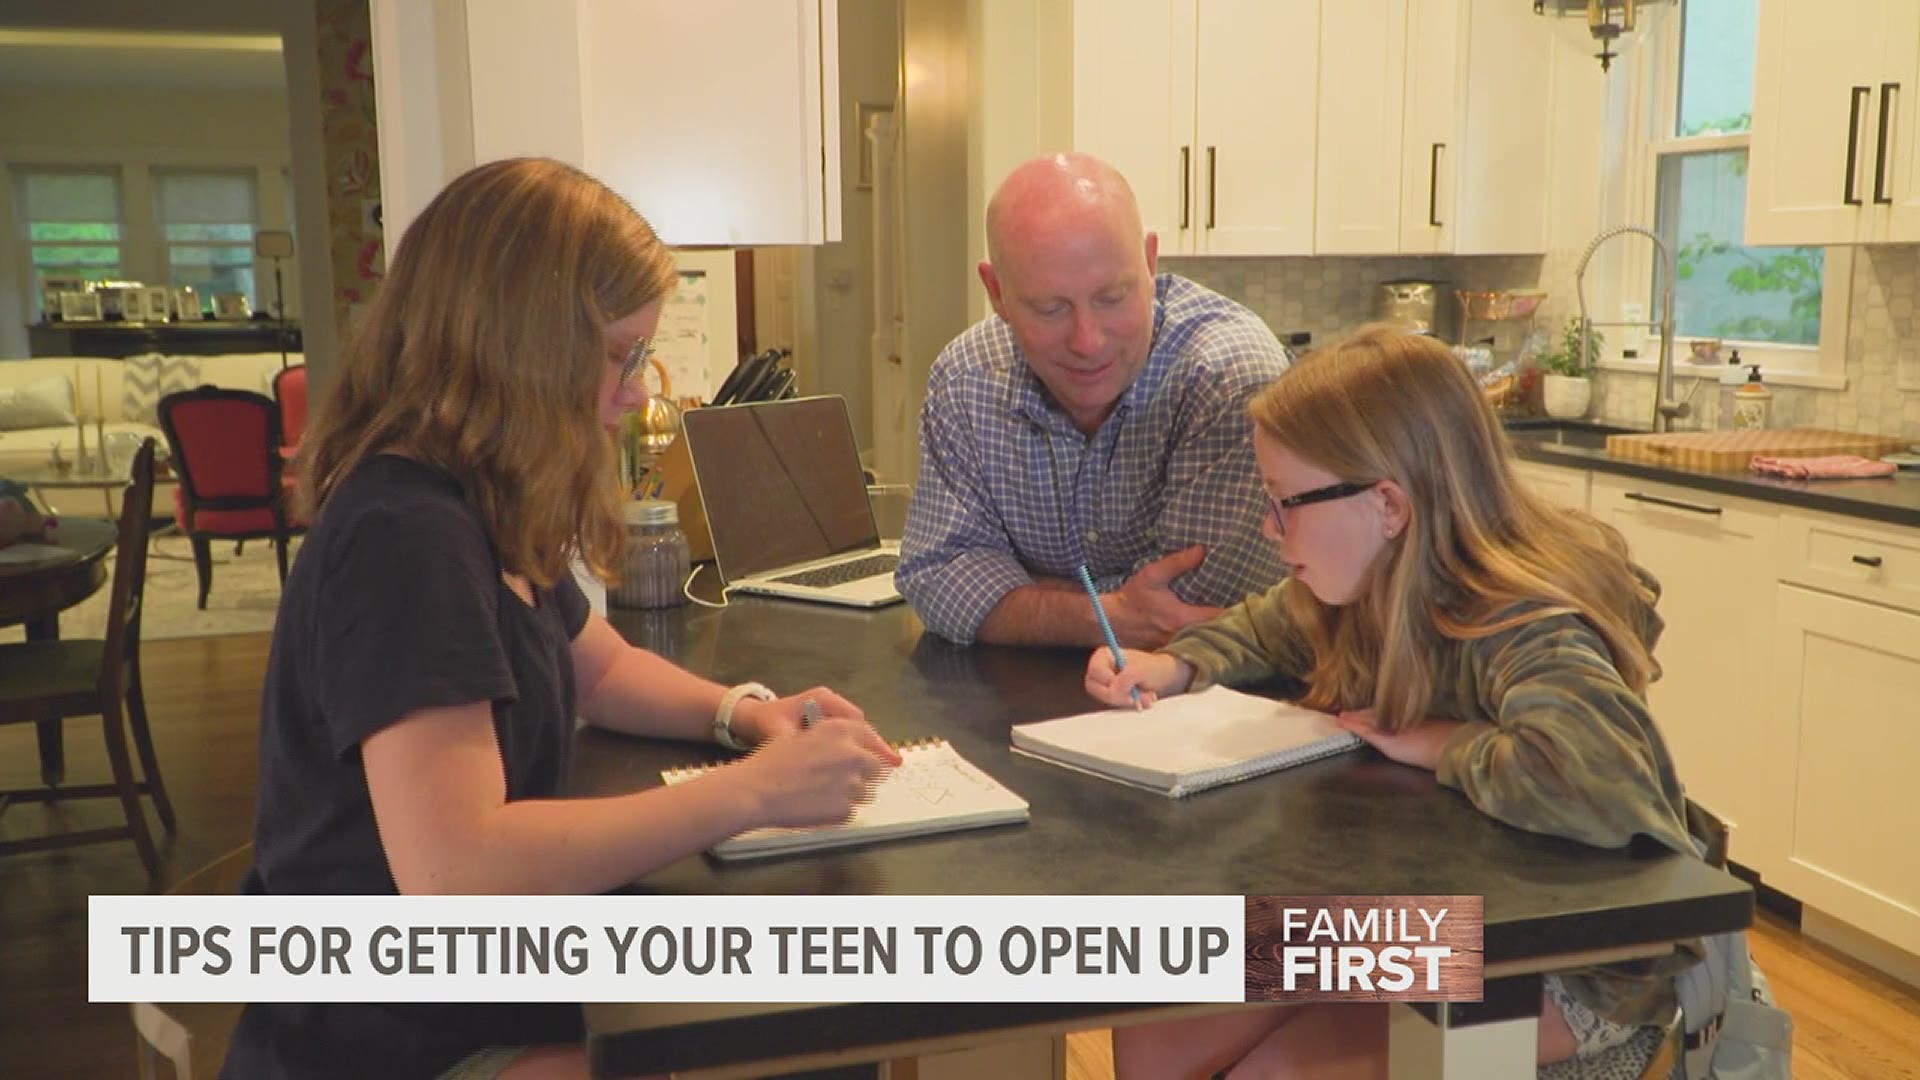 Family First: Tips for getting your teen to open up